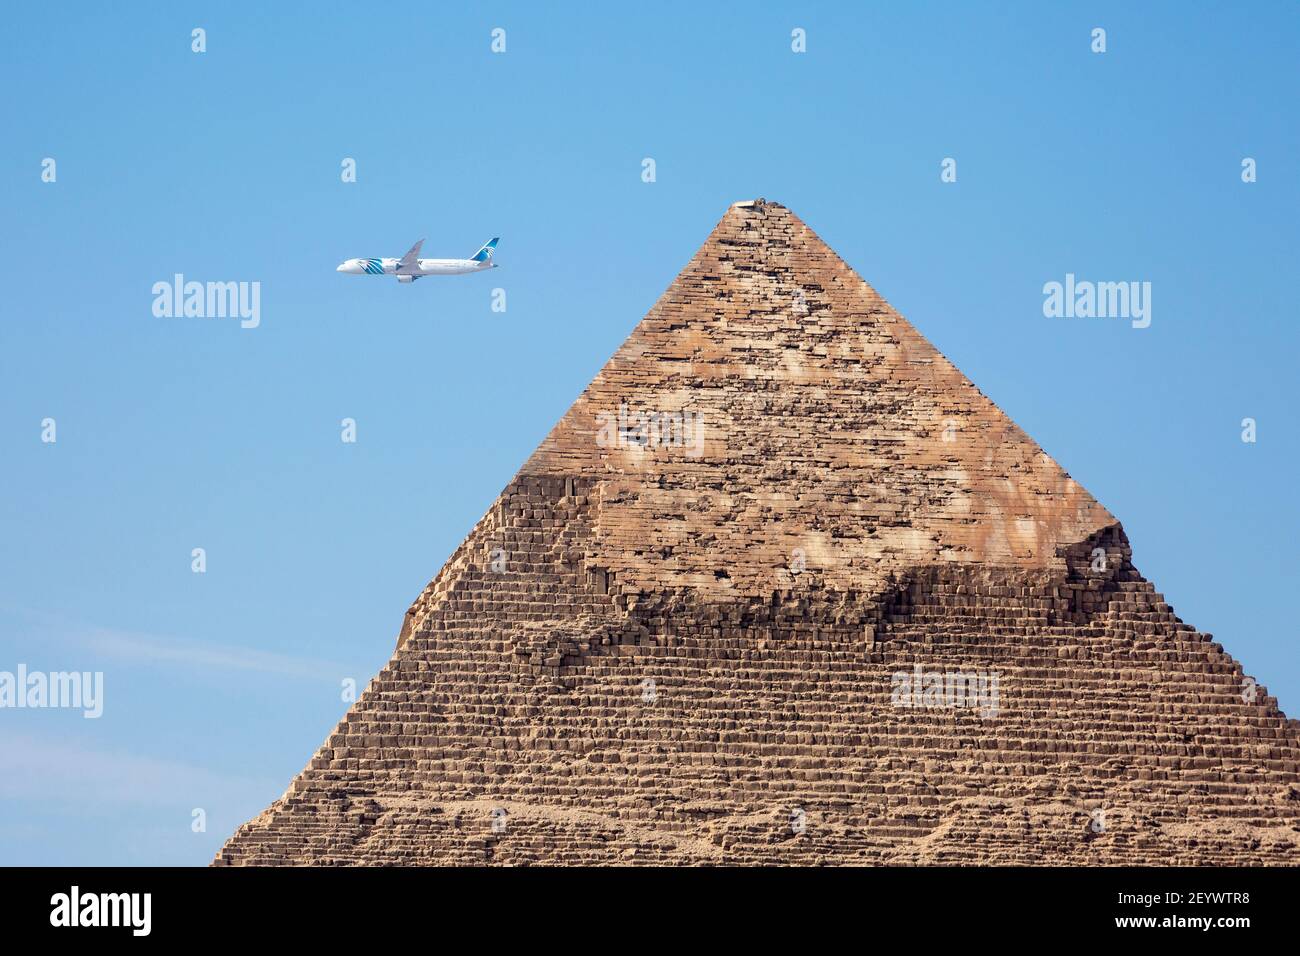 View of a plane passing behind the Pyramid of Khafre, Giza Plateau, Greater Cairo, Egypt Stock Photo